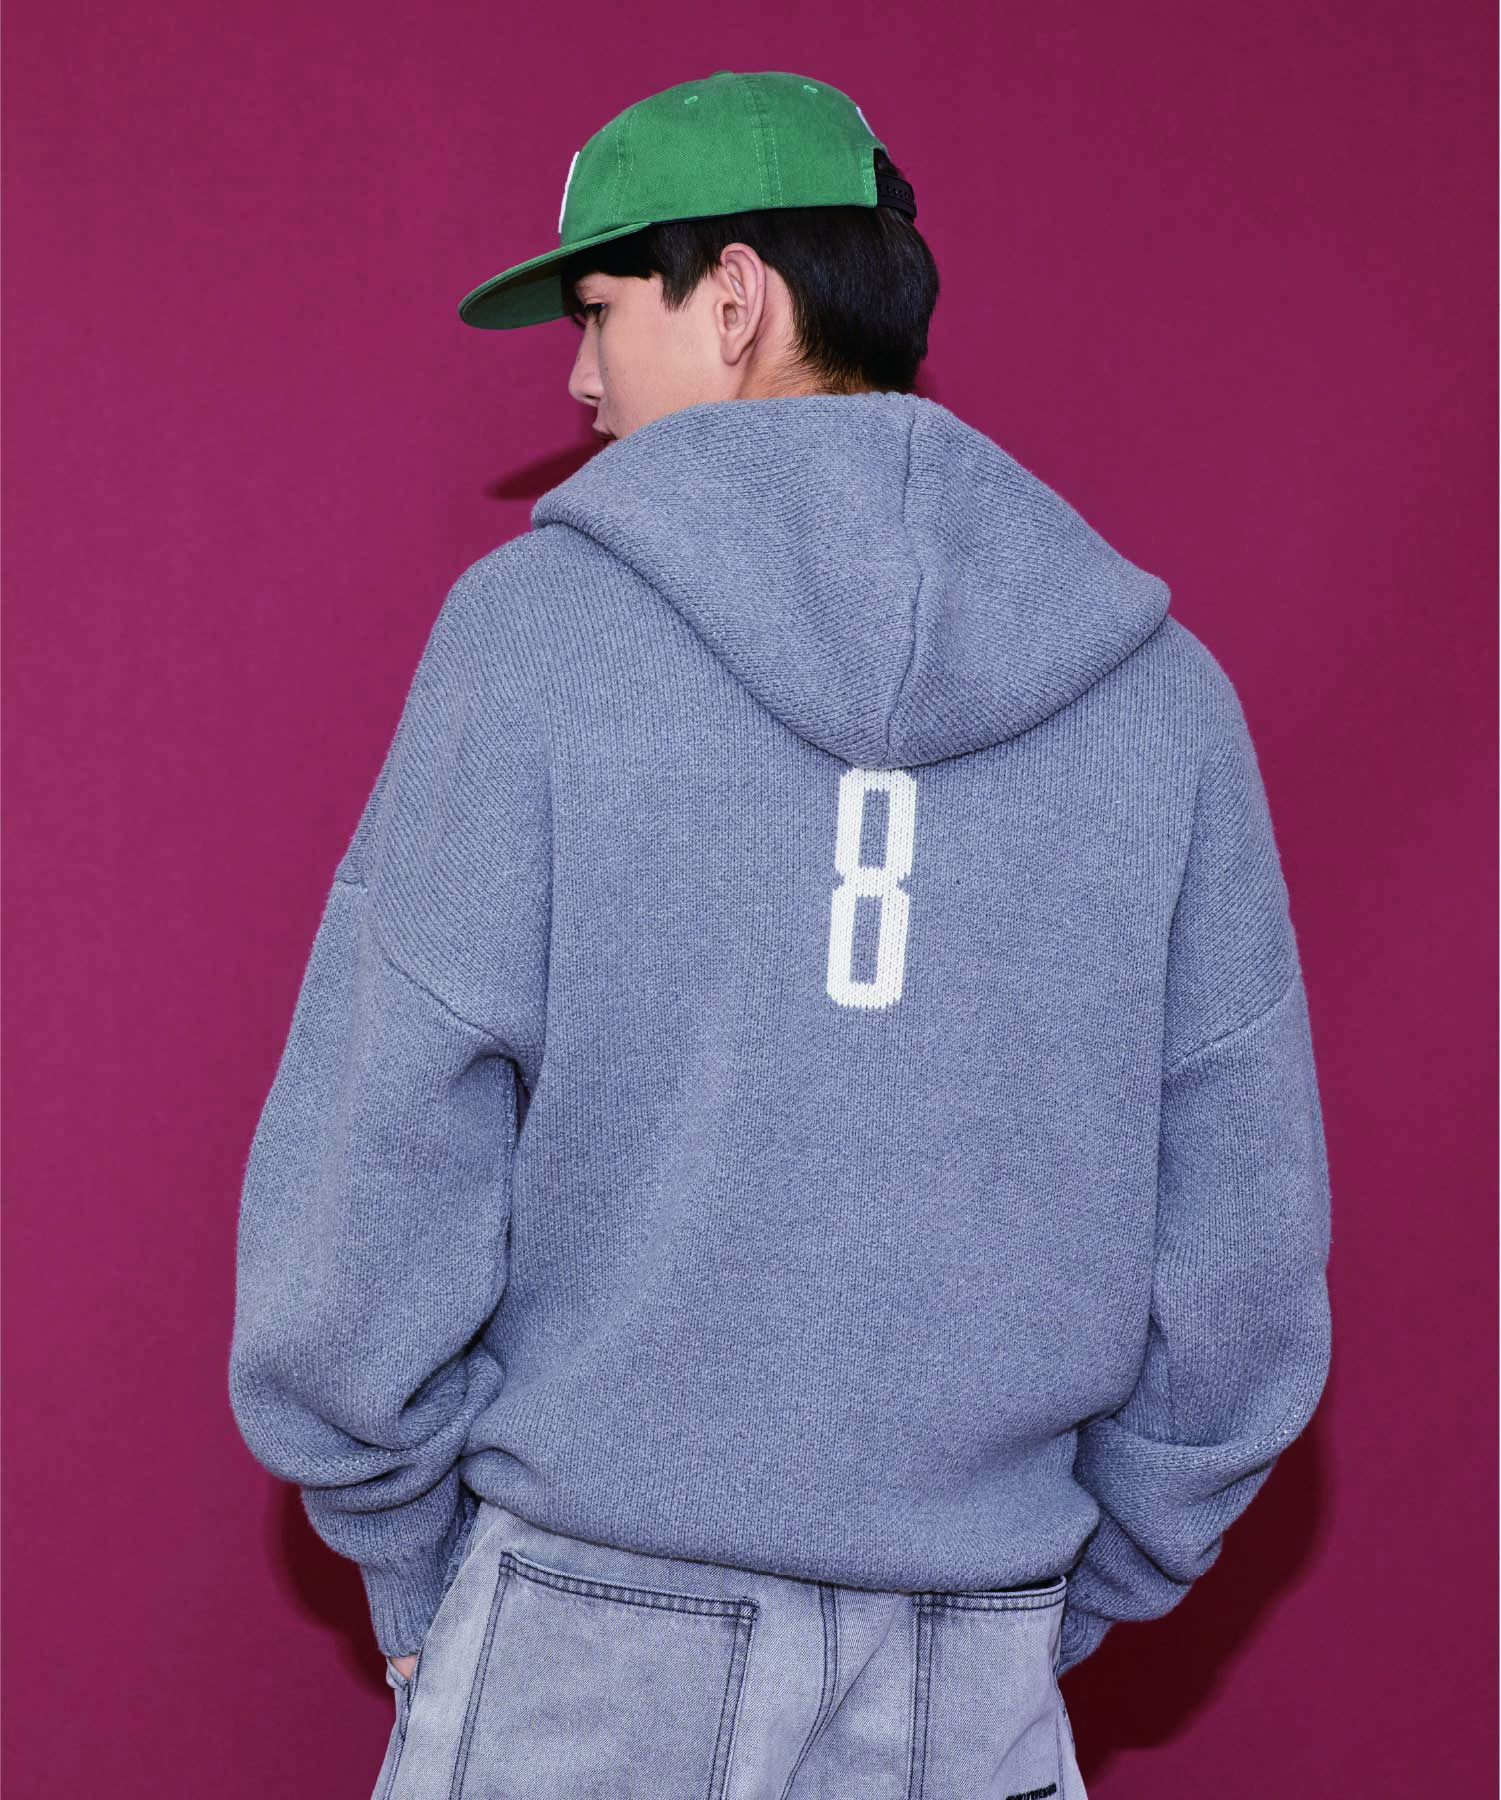 BEENTRILL X BROOKLYNDENIMCO OVERFIT HOODED KNIT SANS 니트후드 (GRAY)